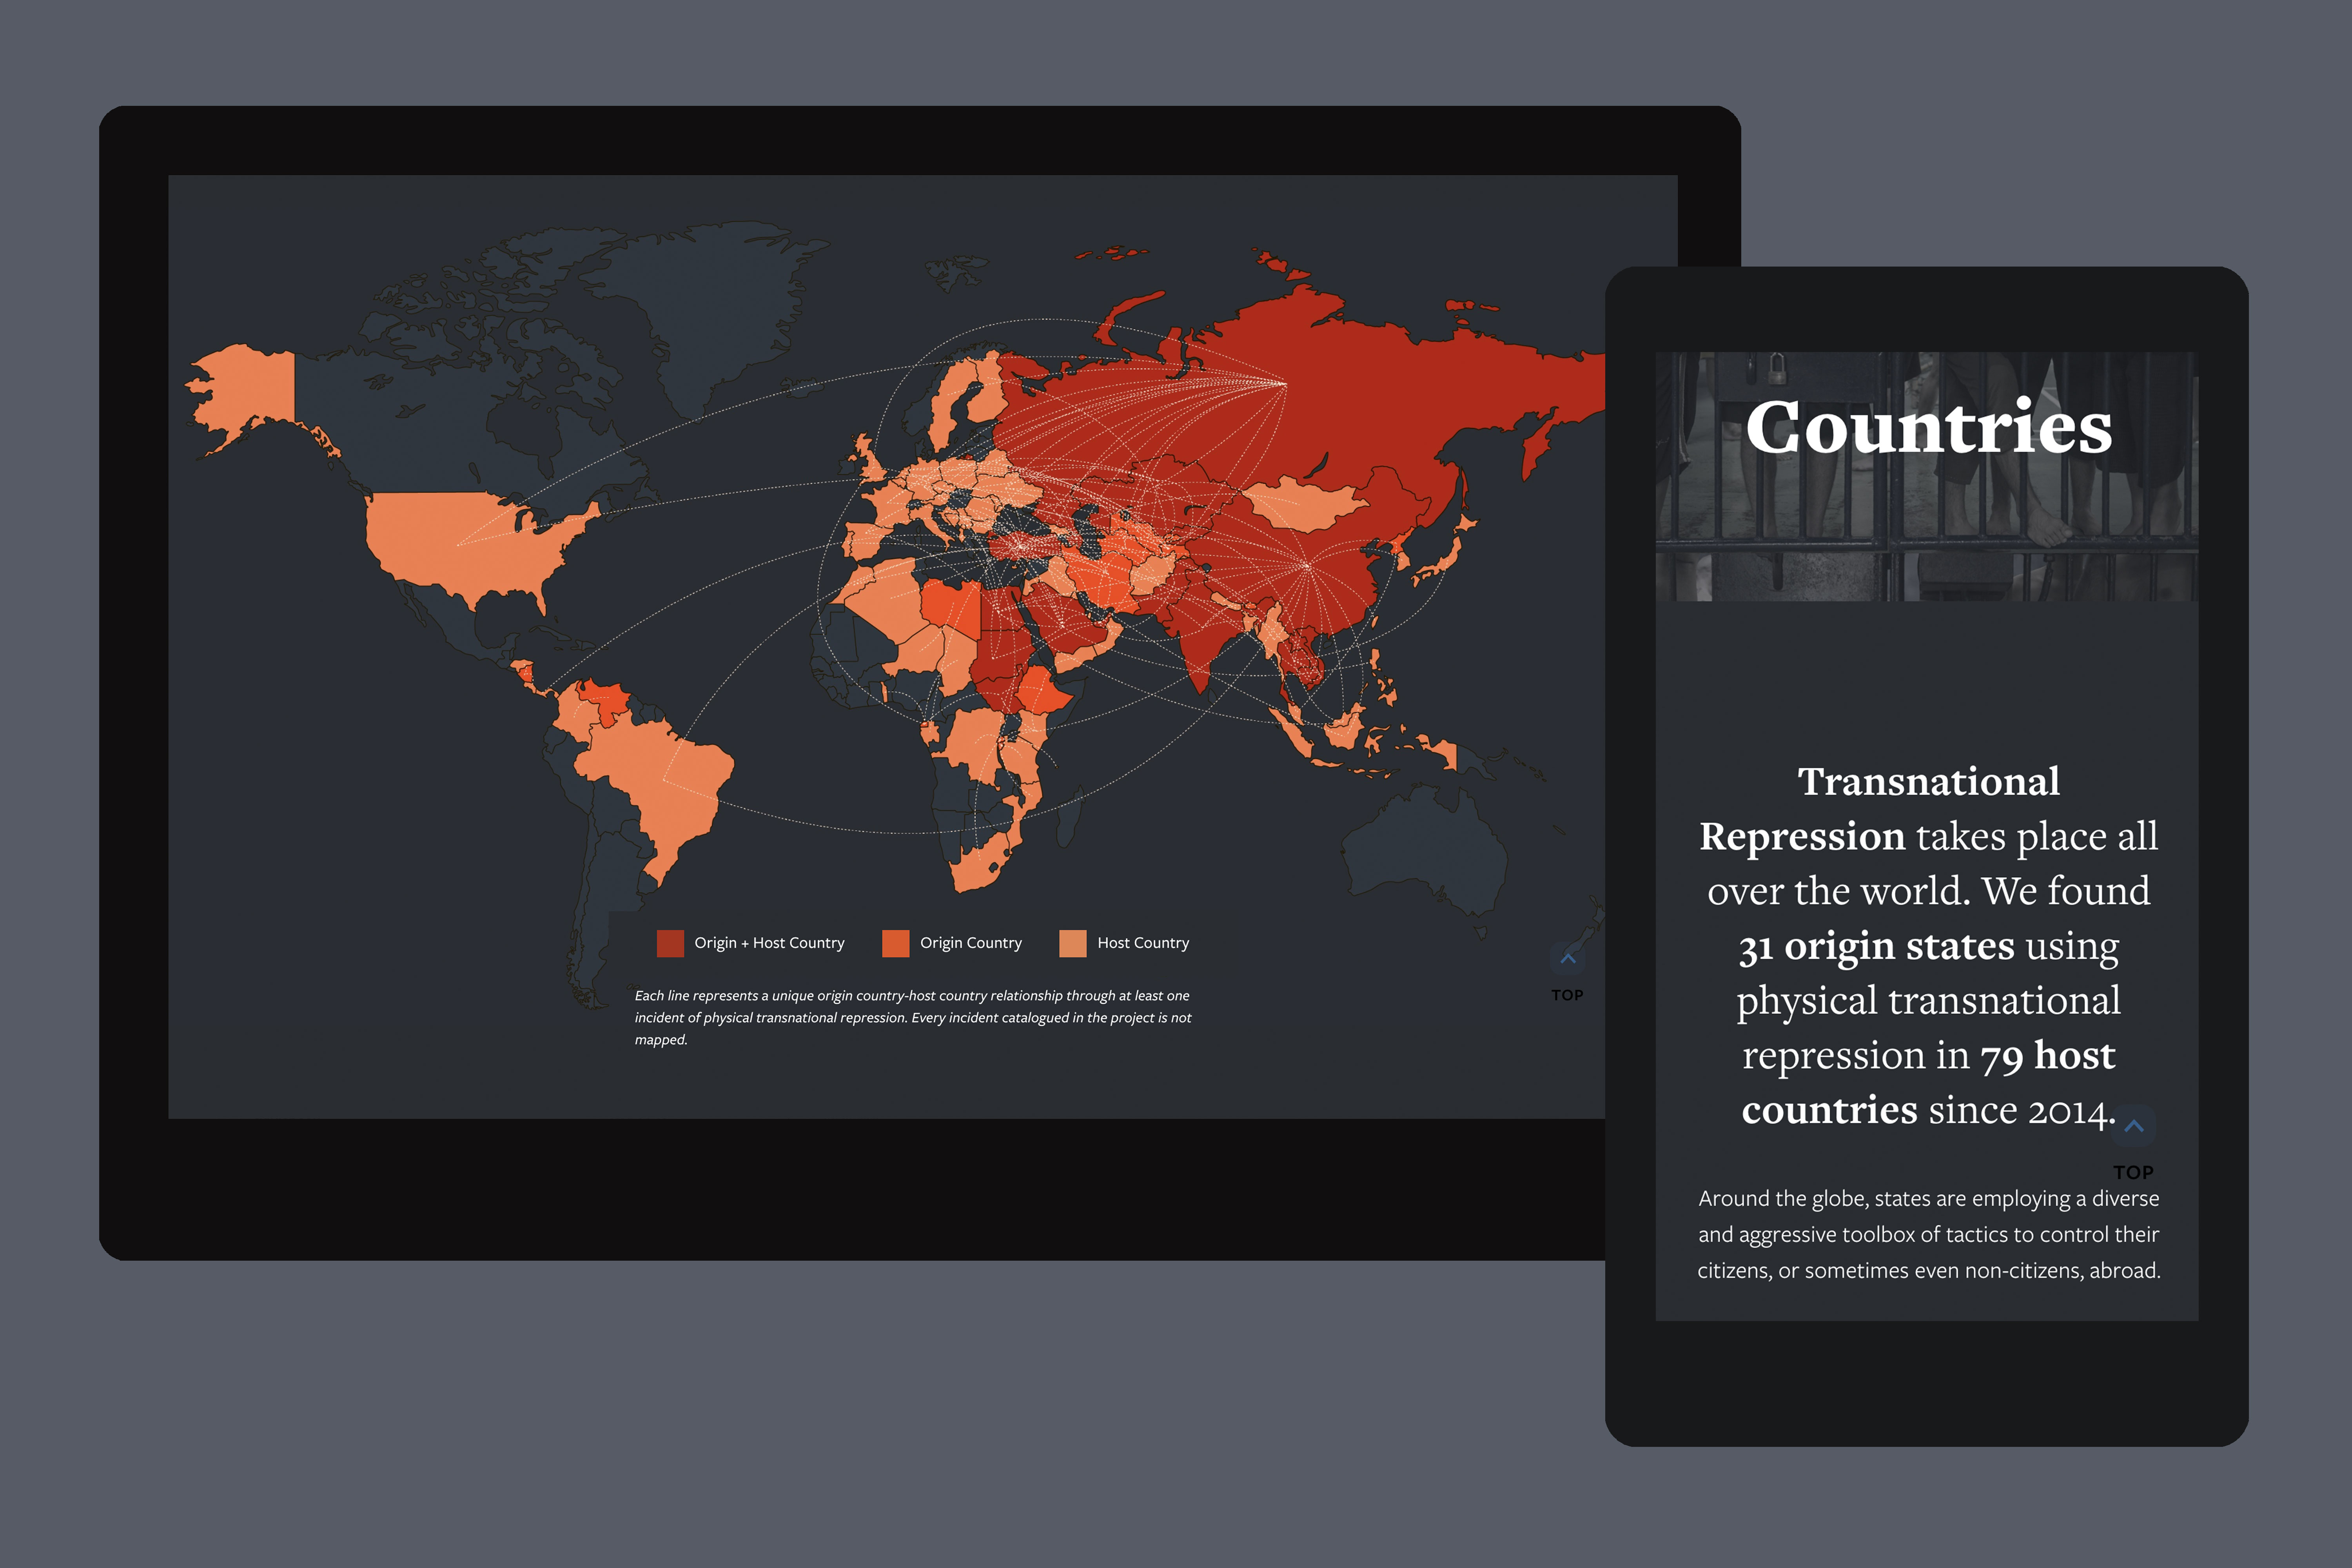 TNR country pages and map showed on desktop and mobile.